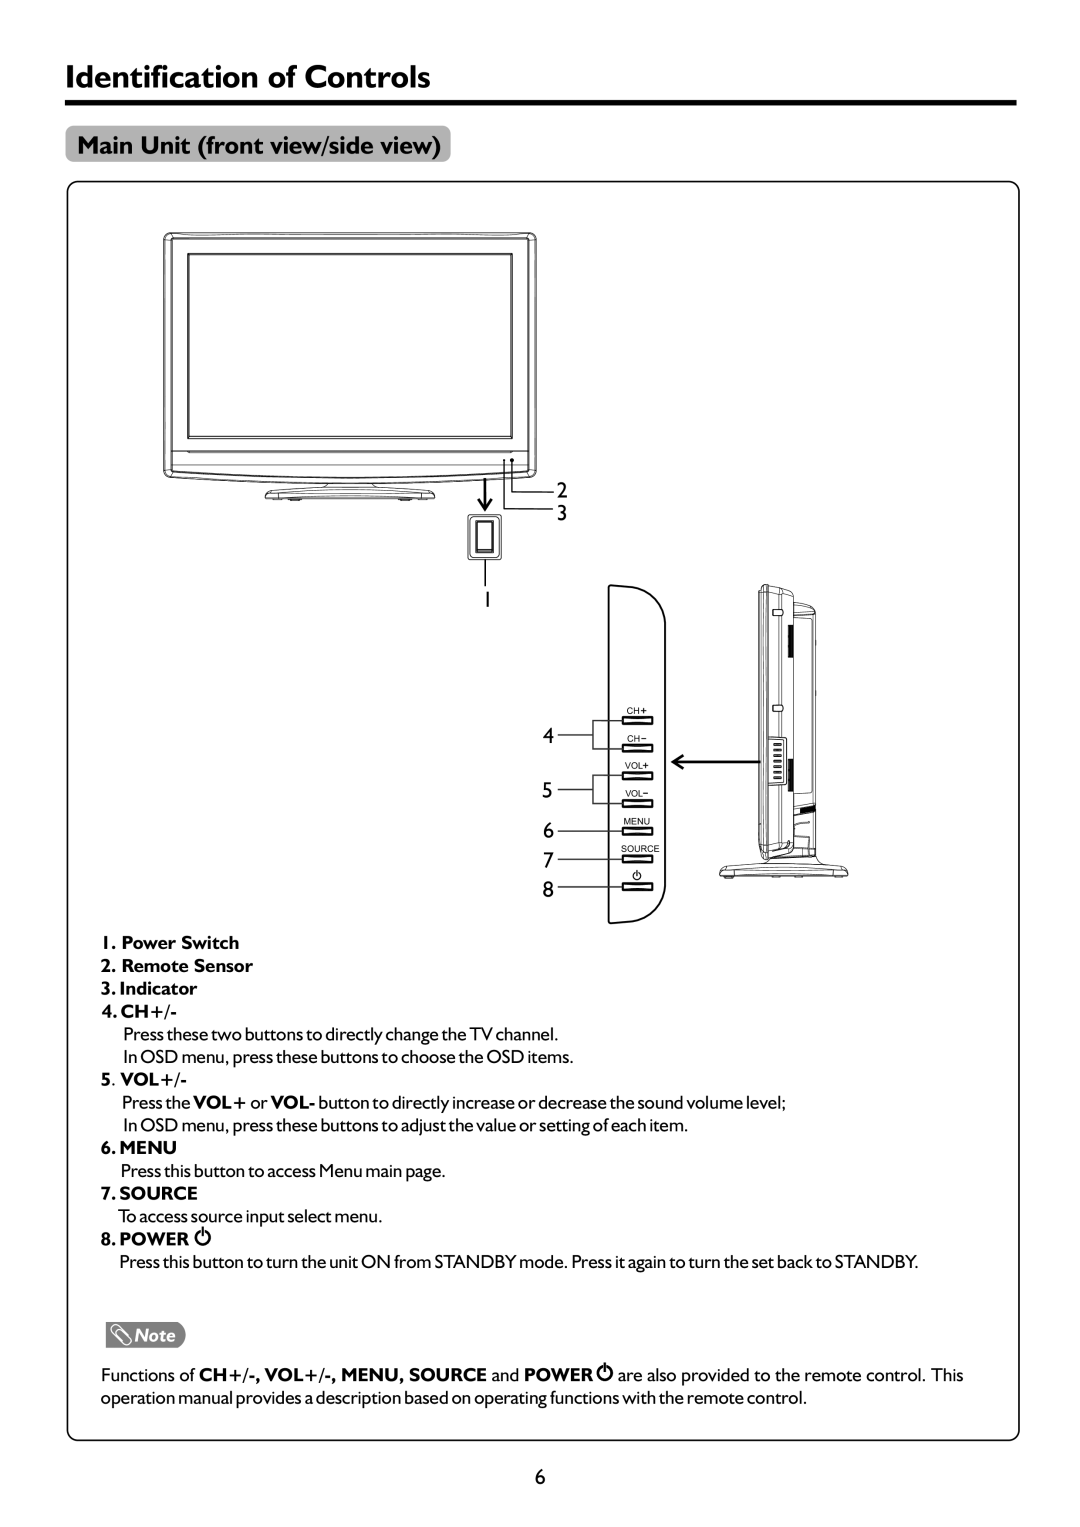 Palsonic TFTV815HD owner manual Identification of Controls, Main Unit front view/side view, 5.VOL+, Menu, Source, Power 